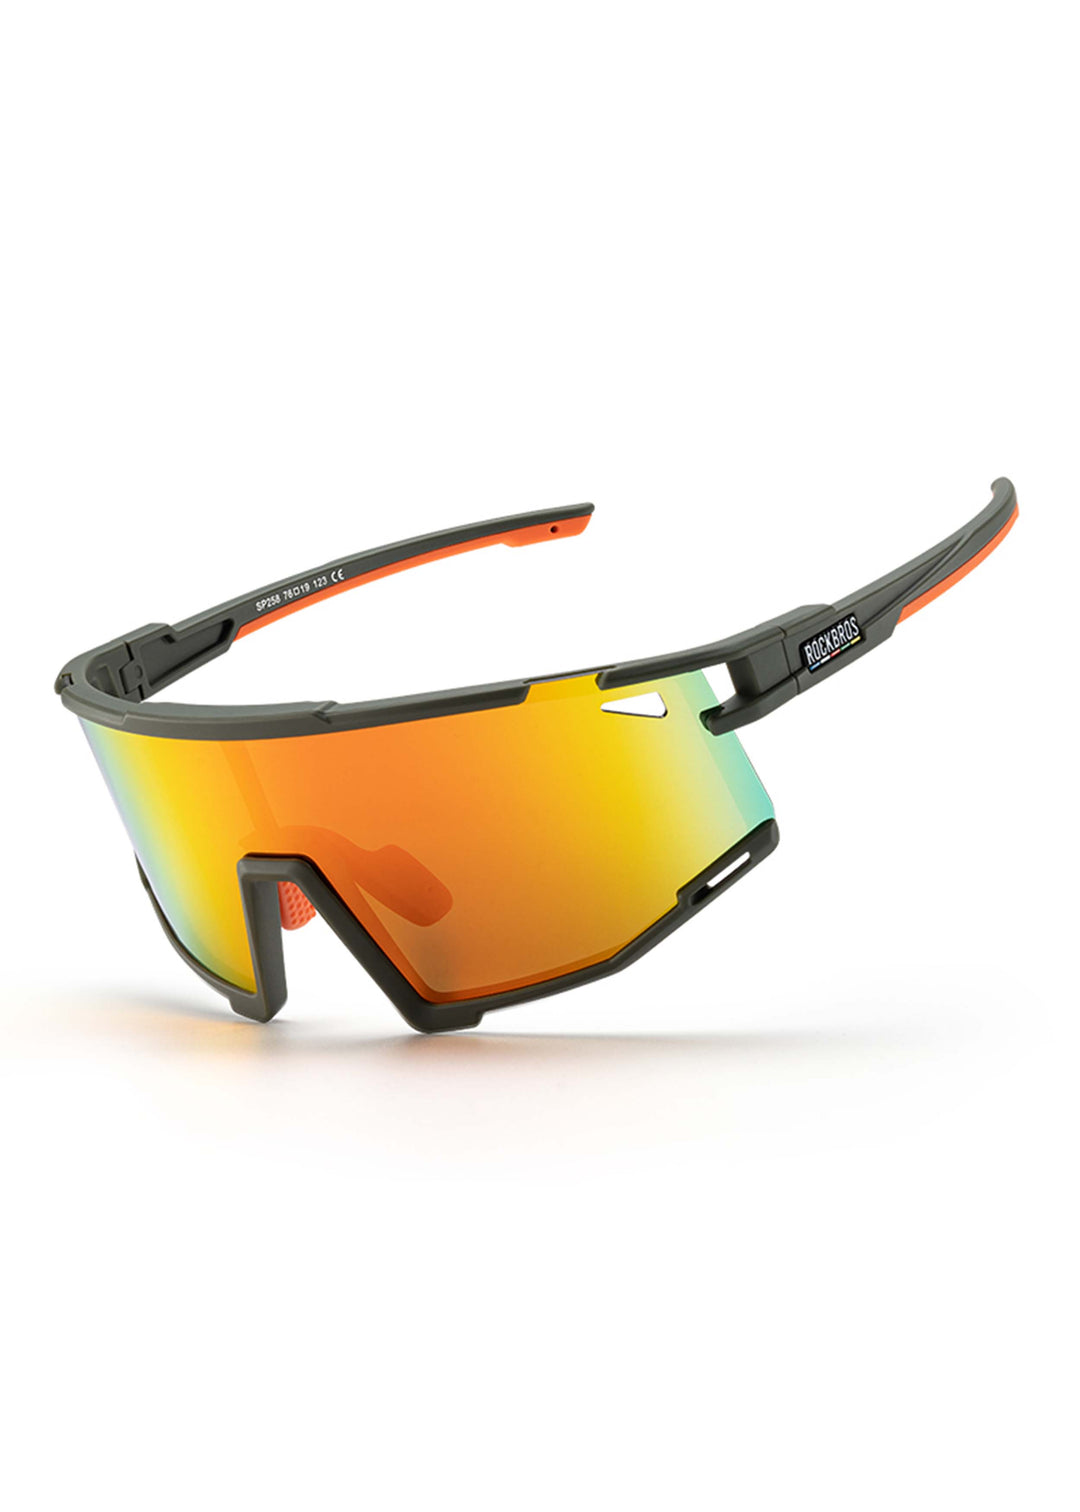 Cycling Glasses - Polarized/Color Changing, Polarized Orange Red